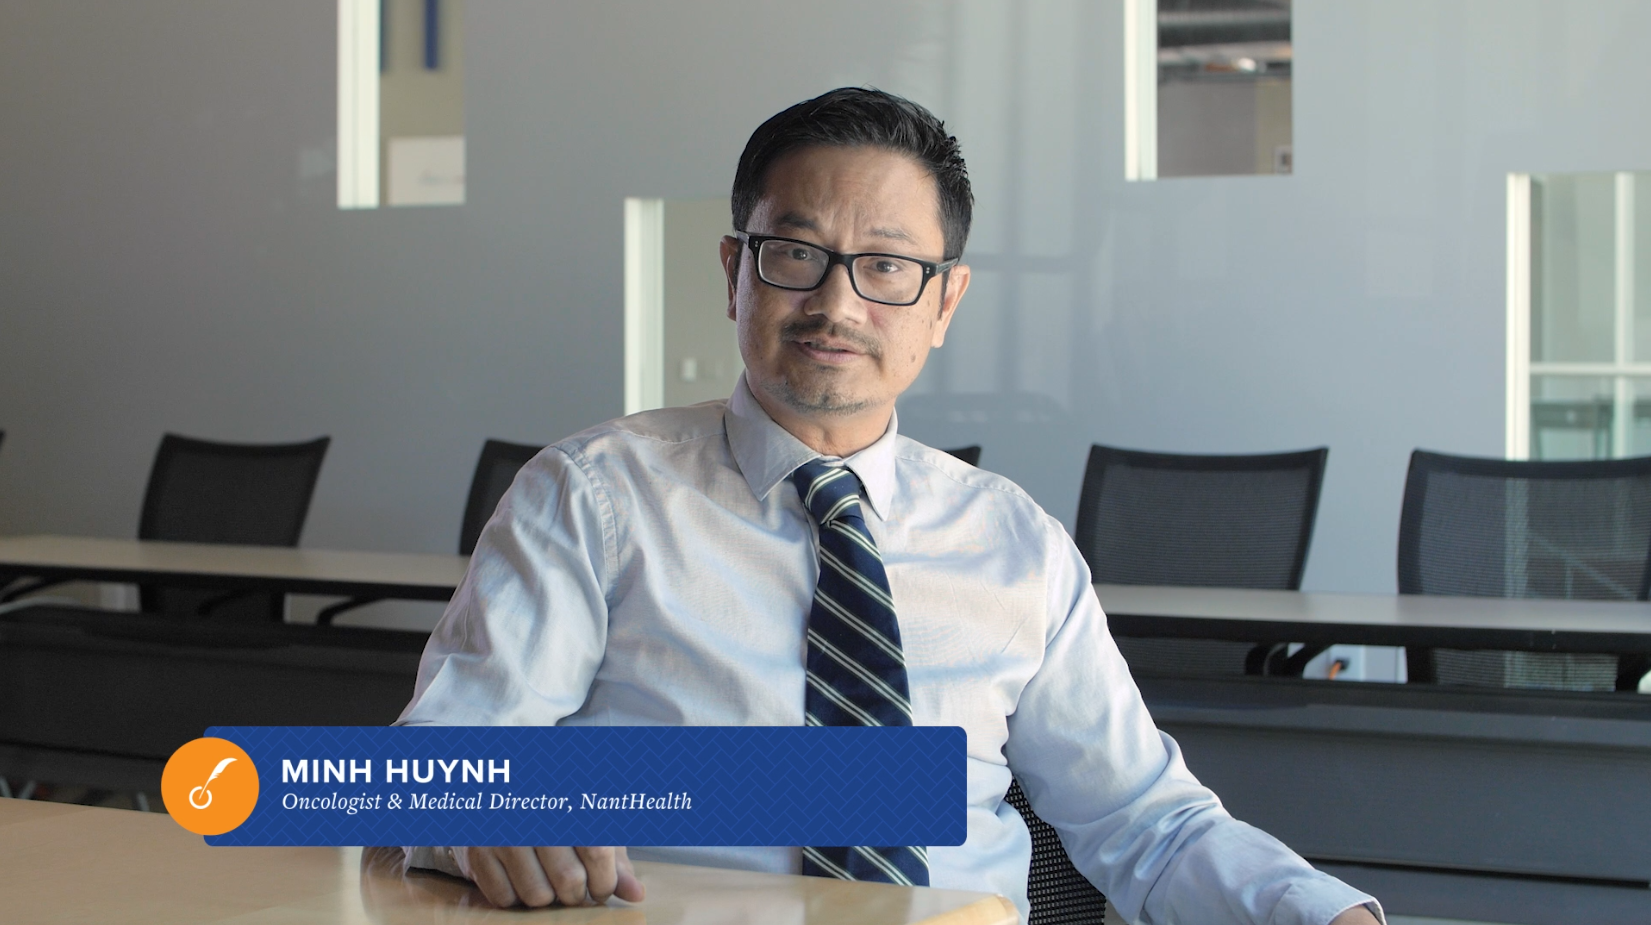 Dr. Minh Huynh, Oncologist and Medical Director at NantHealth